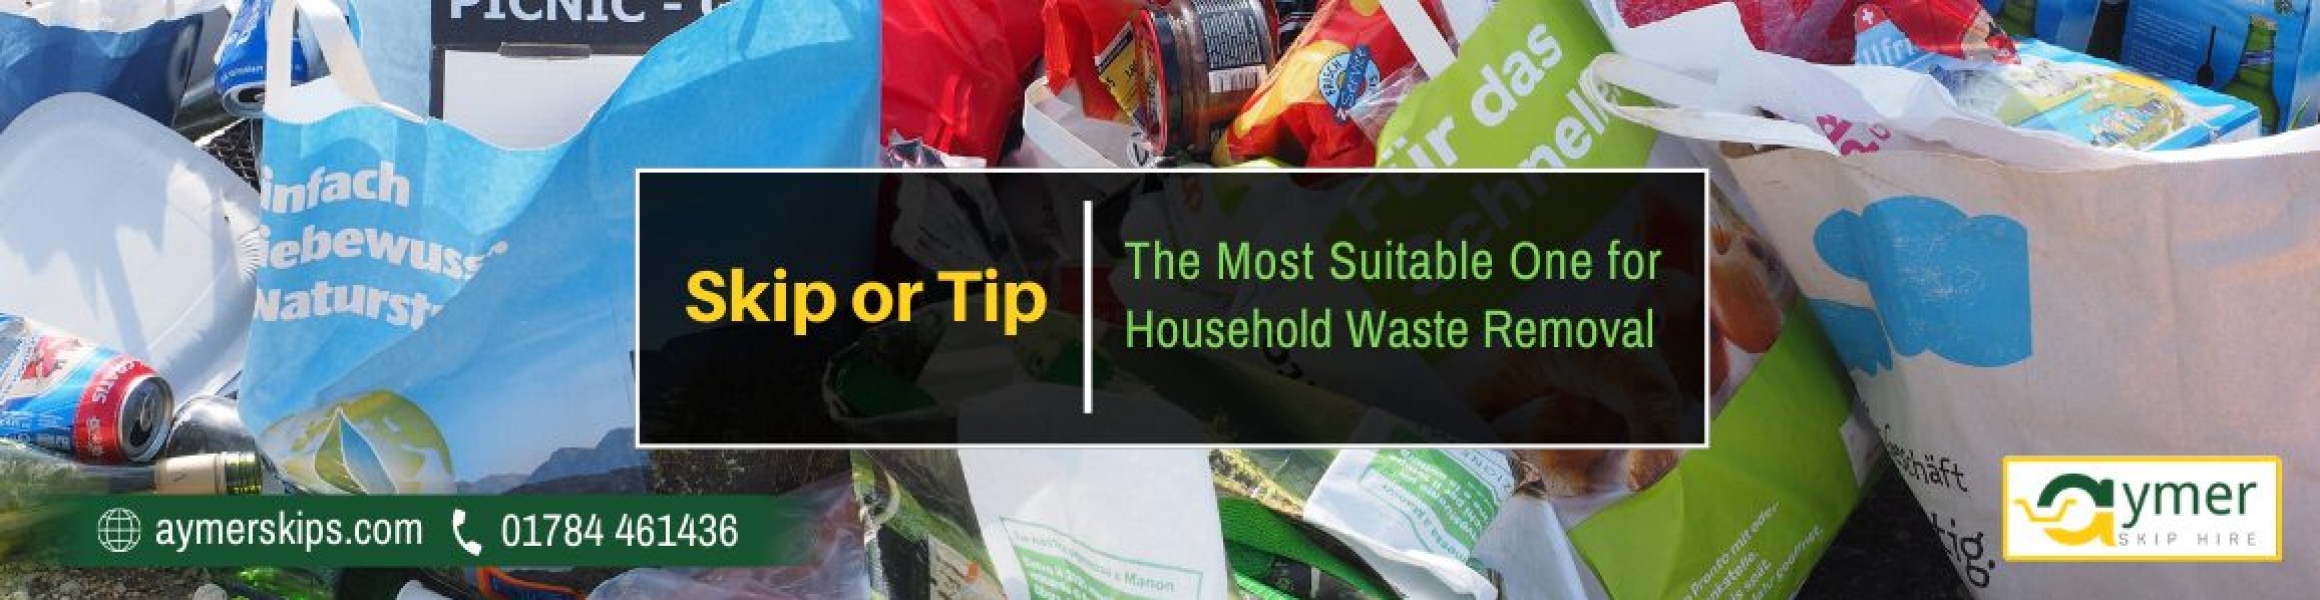 Skip or Tip – The Most Suitable One for Household Waste Removal